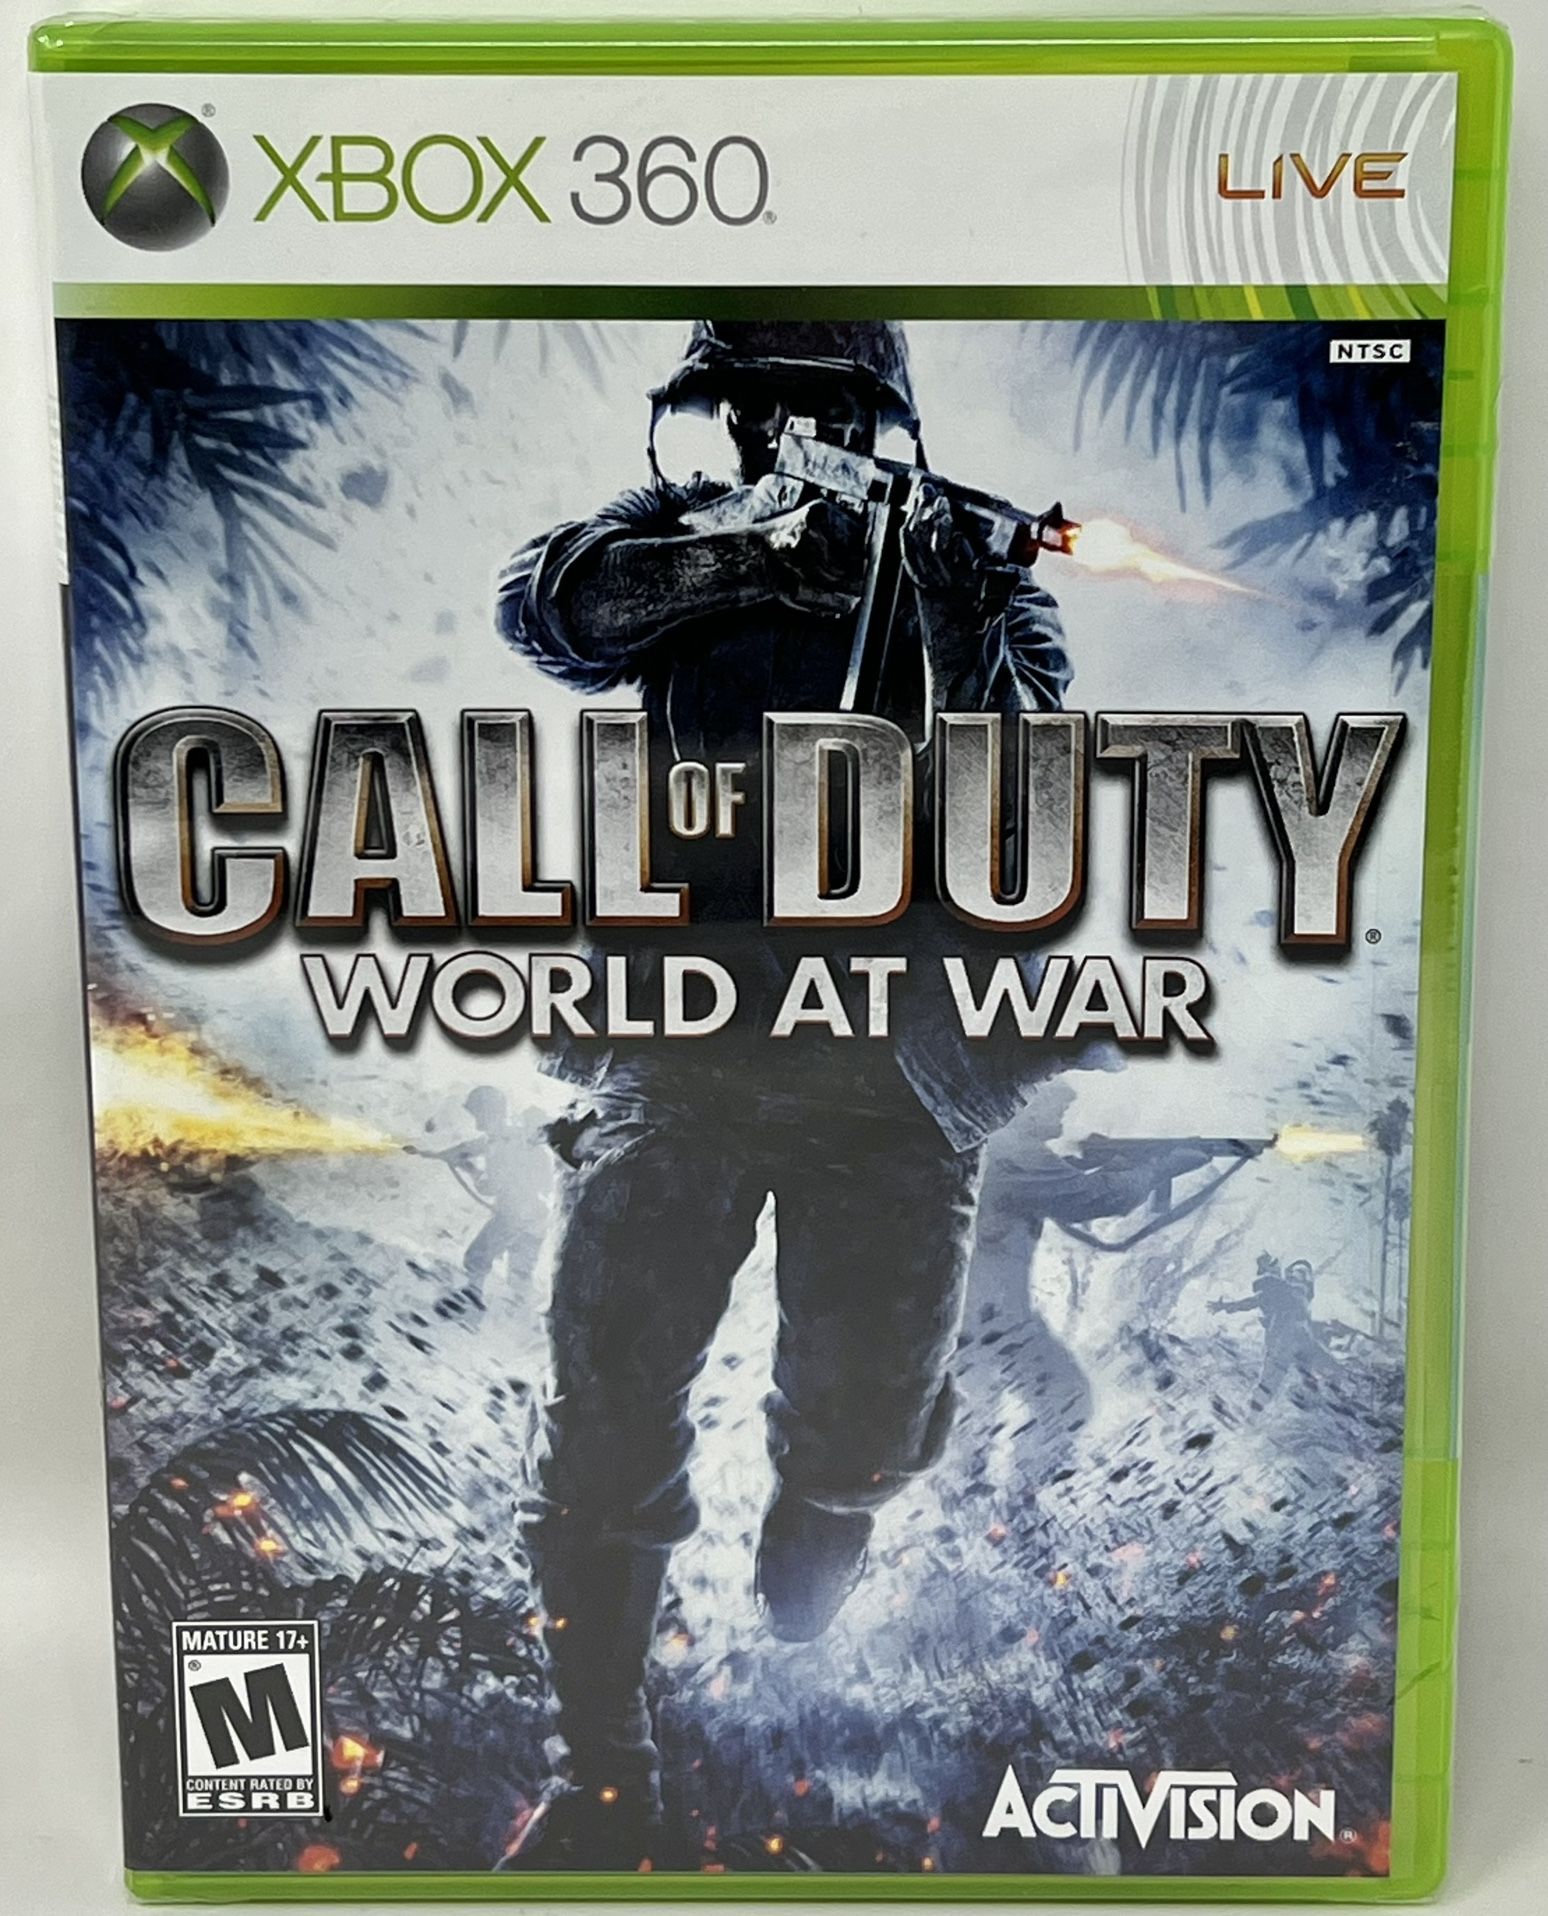 New, Sealed - Xbox 360 Call of Duty: World at War Video Game